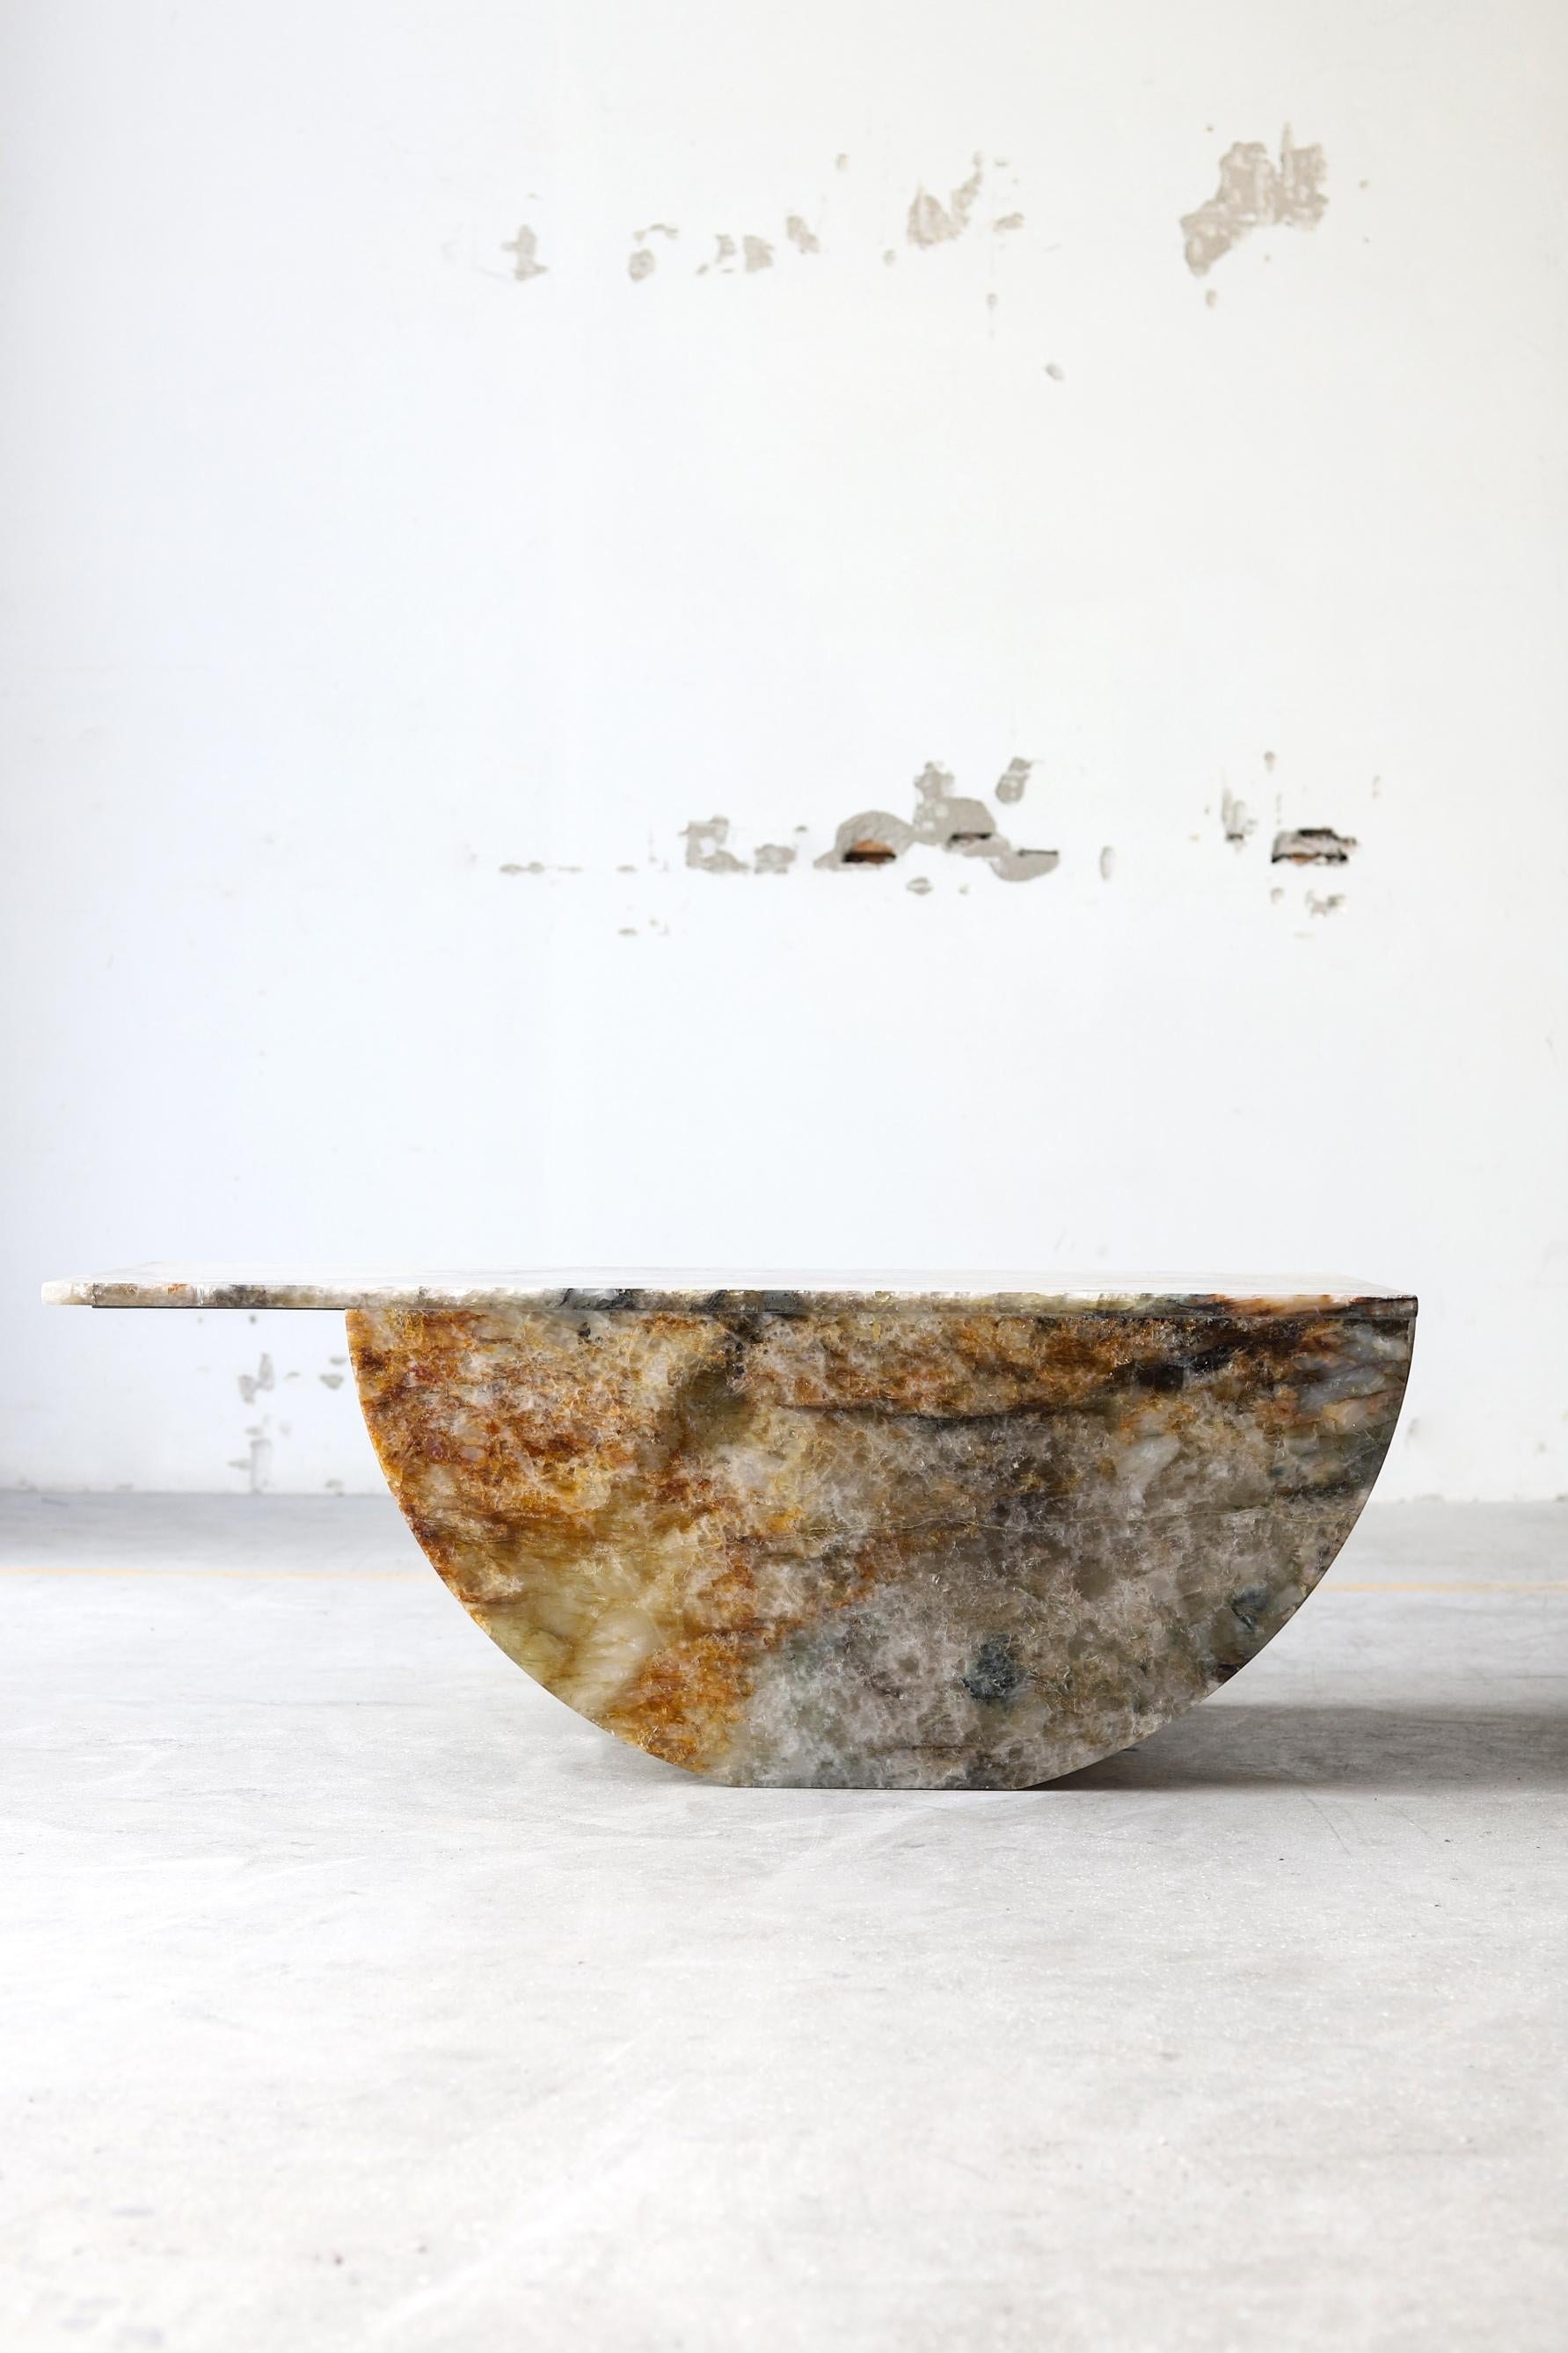 SST017 coffee table by Stone Stackers
Dimensions: W 119 x D 57,5 x H 43 cm.
Materials: Patagonia marble.
Weight: 85 kg.

This coffee table is entirely made of Patagonia marble slabs, which are admirably shaped directly by previous productions. The